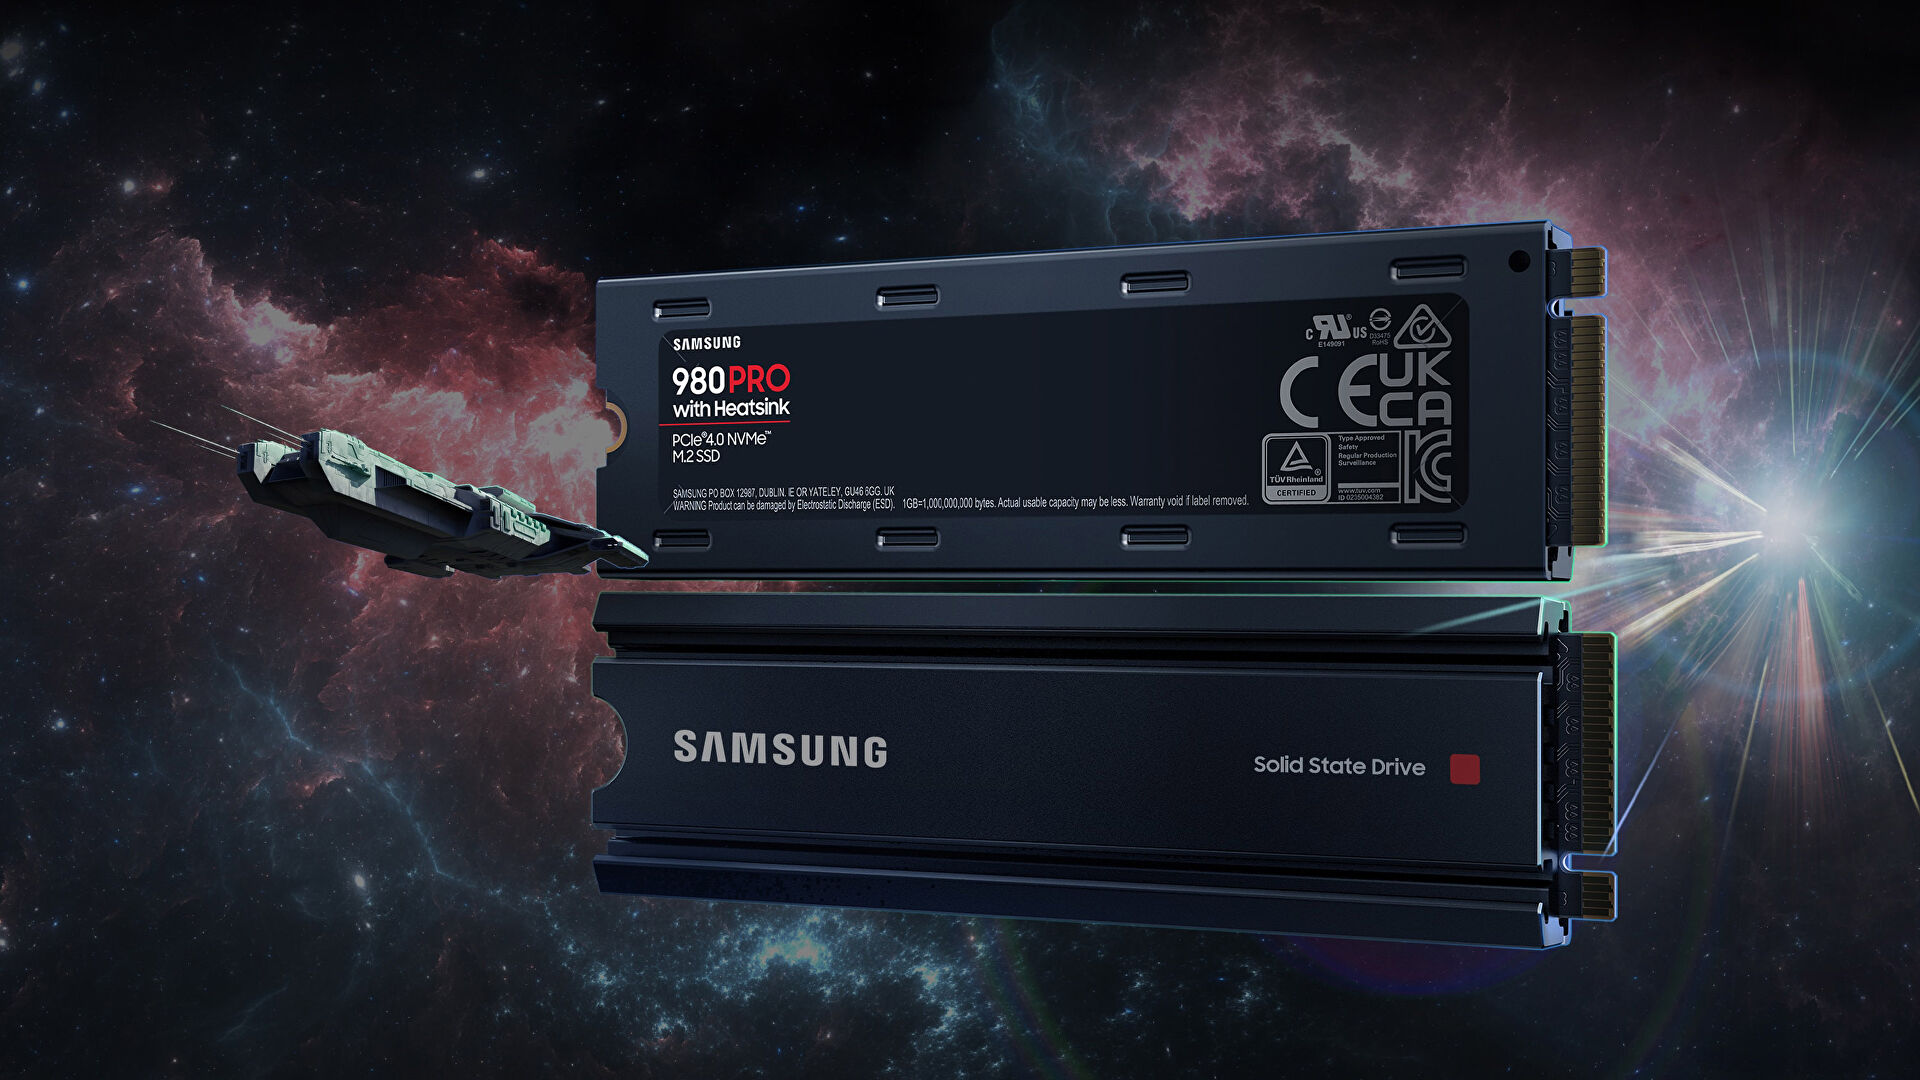 Pick up a high-spec Samsung 980 Pro 2TB NVMe SSD with heatsink for £184